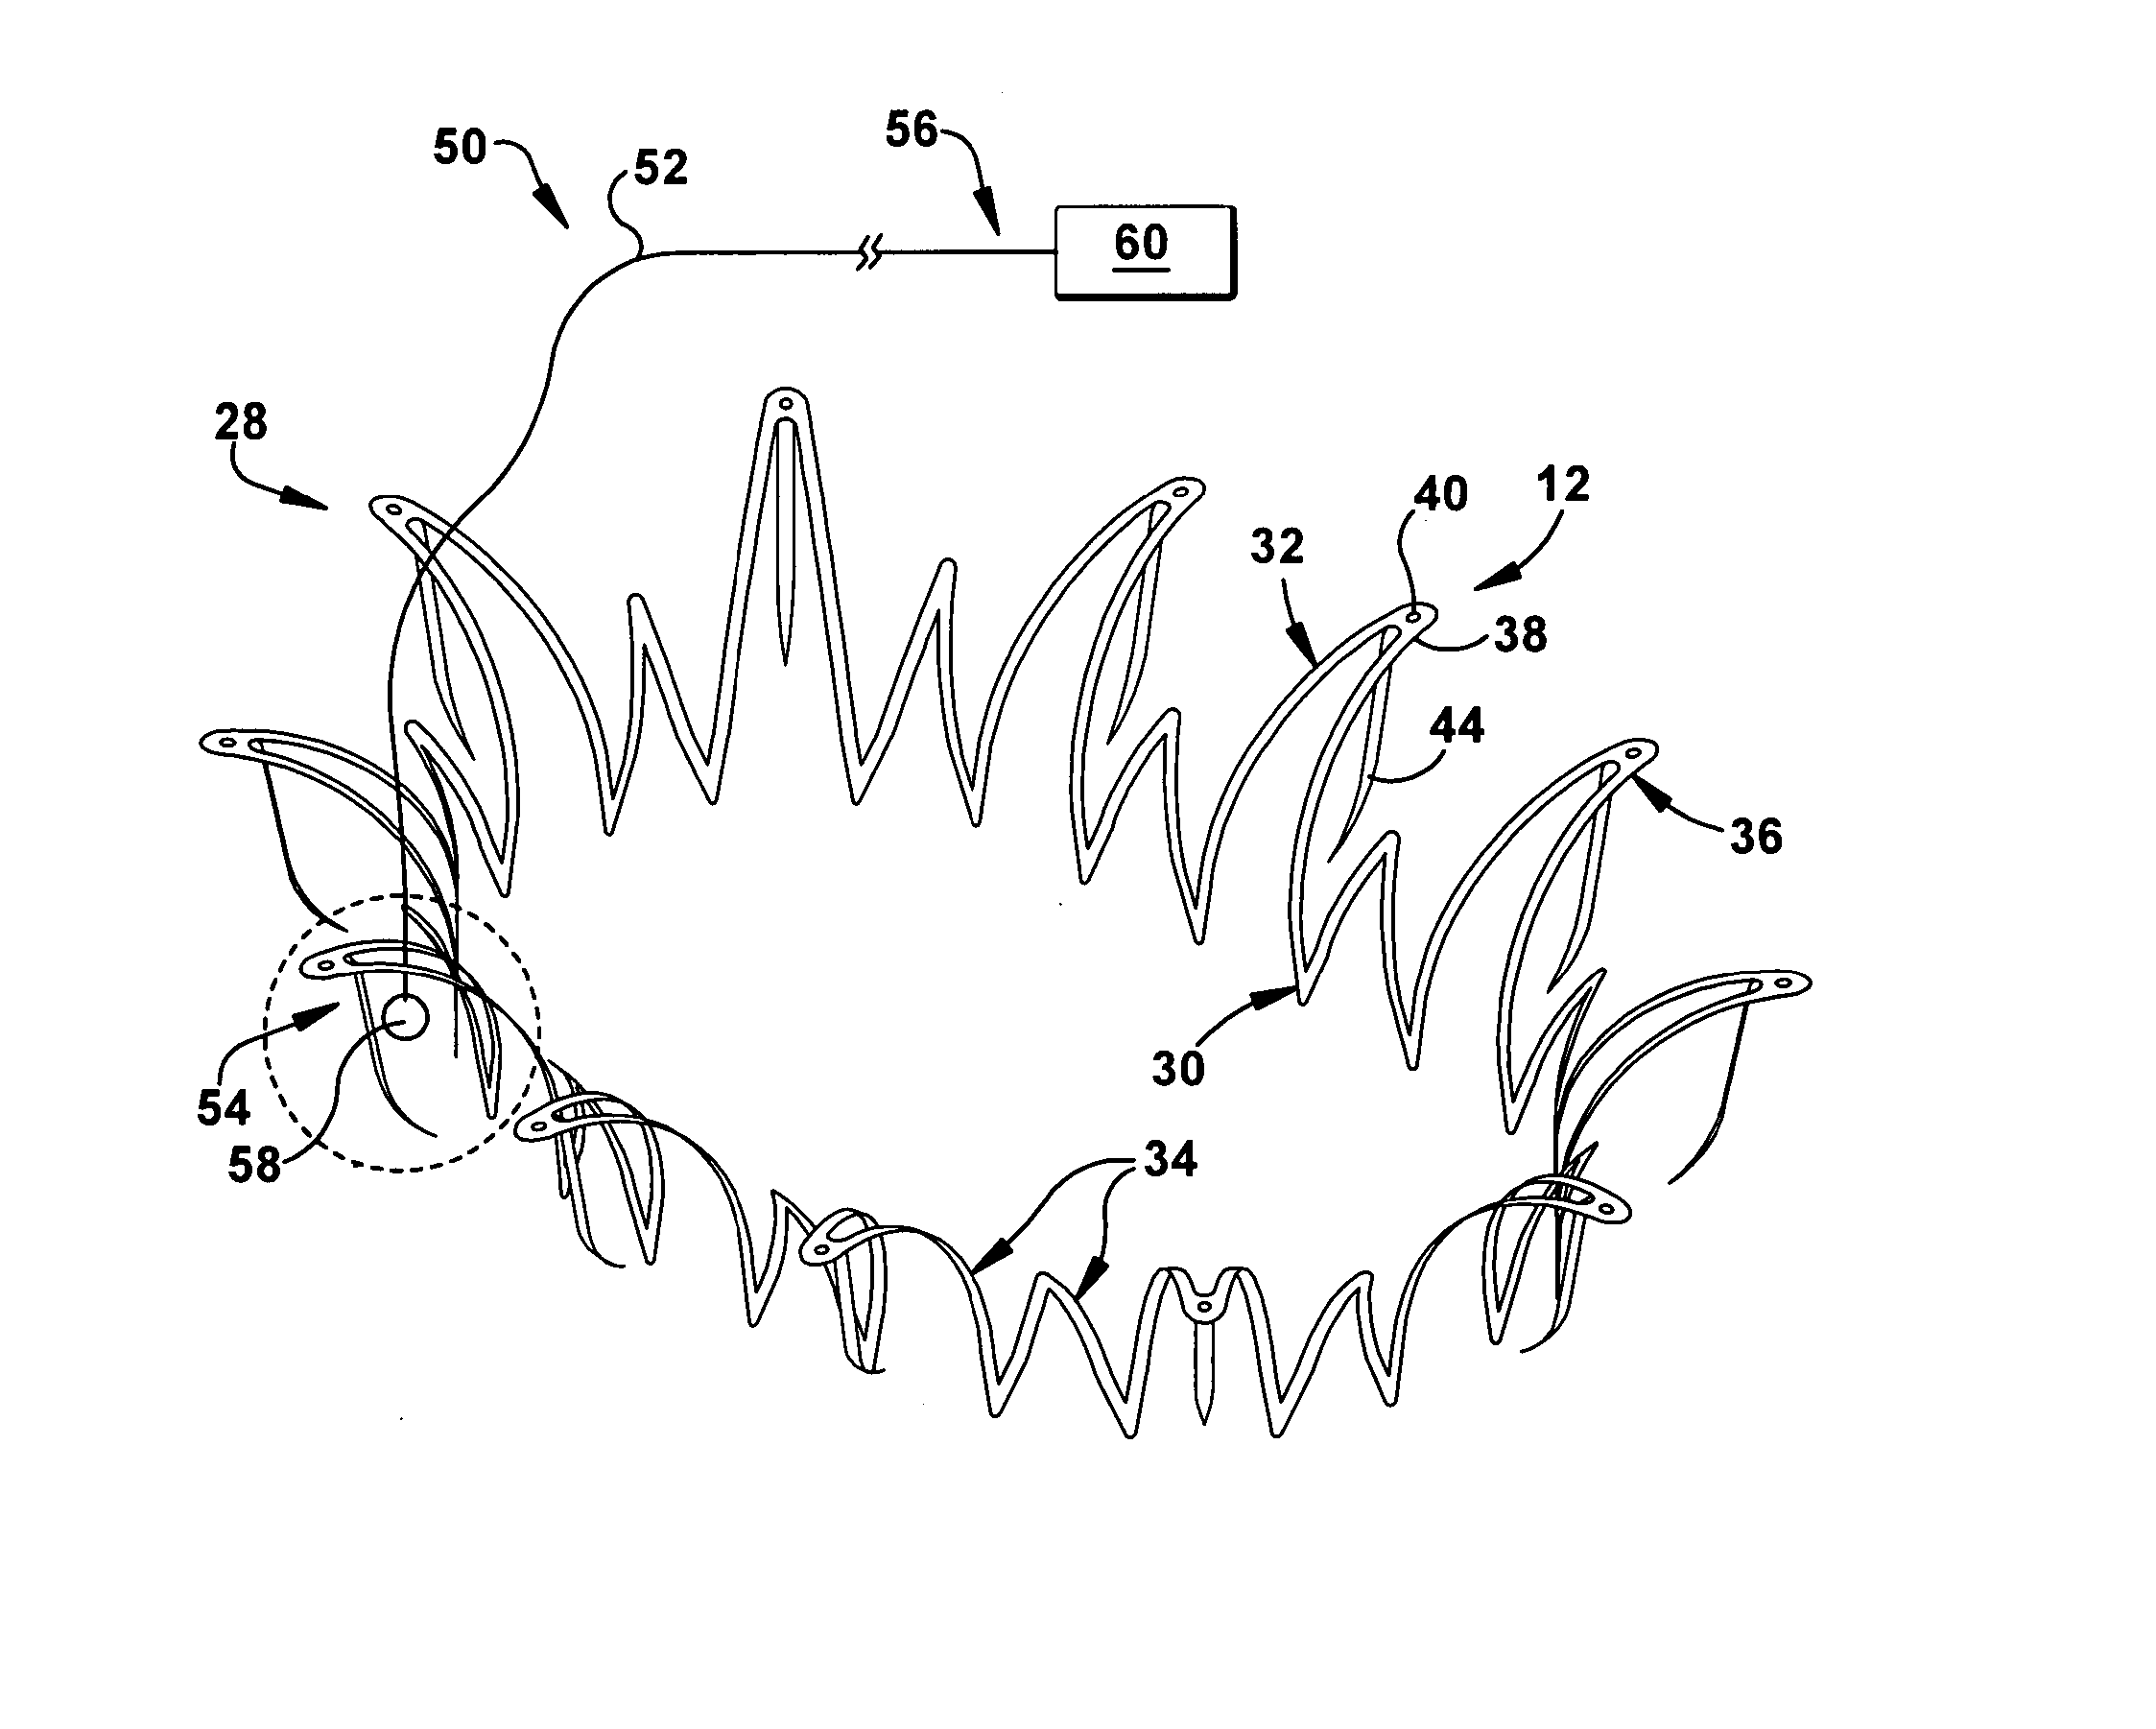 Apparatus and methods for repair of a cardiac valve